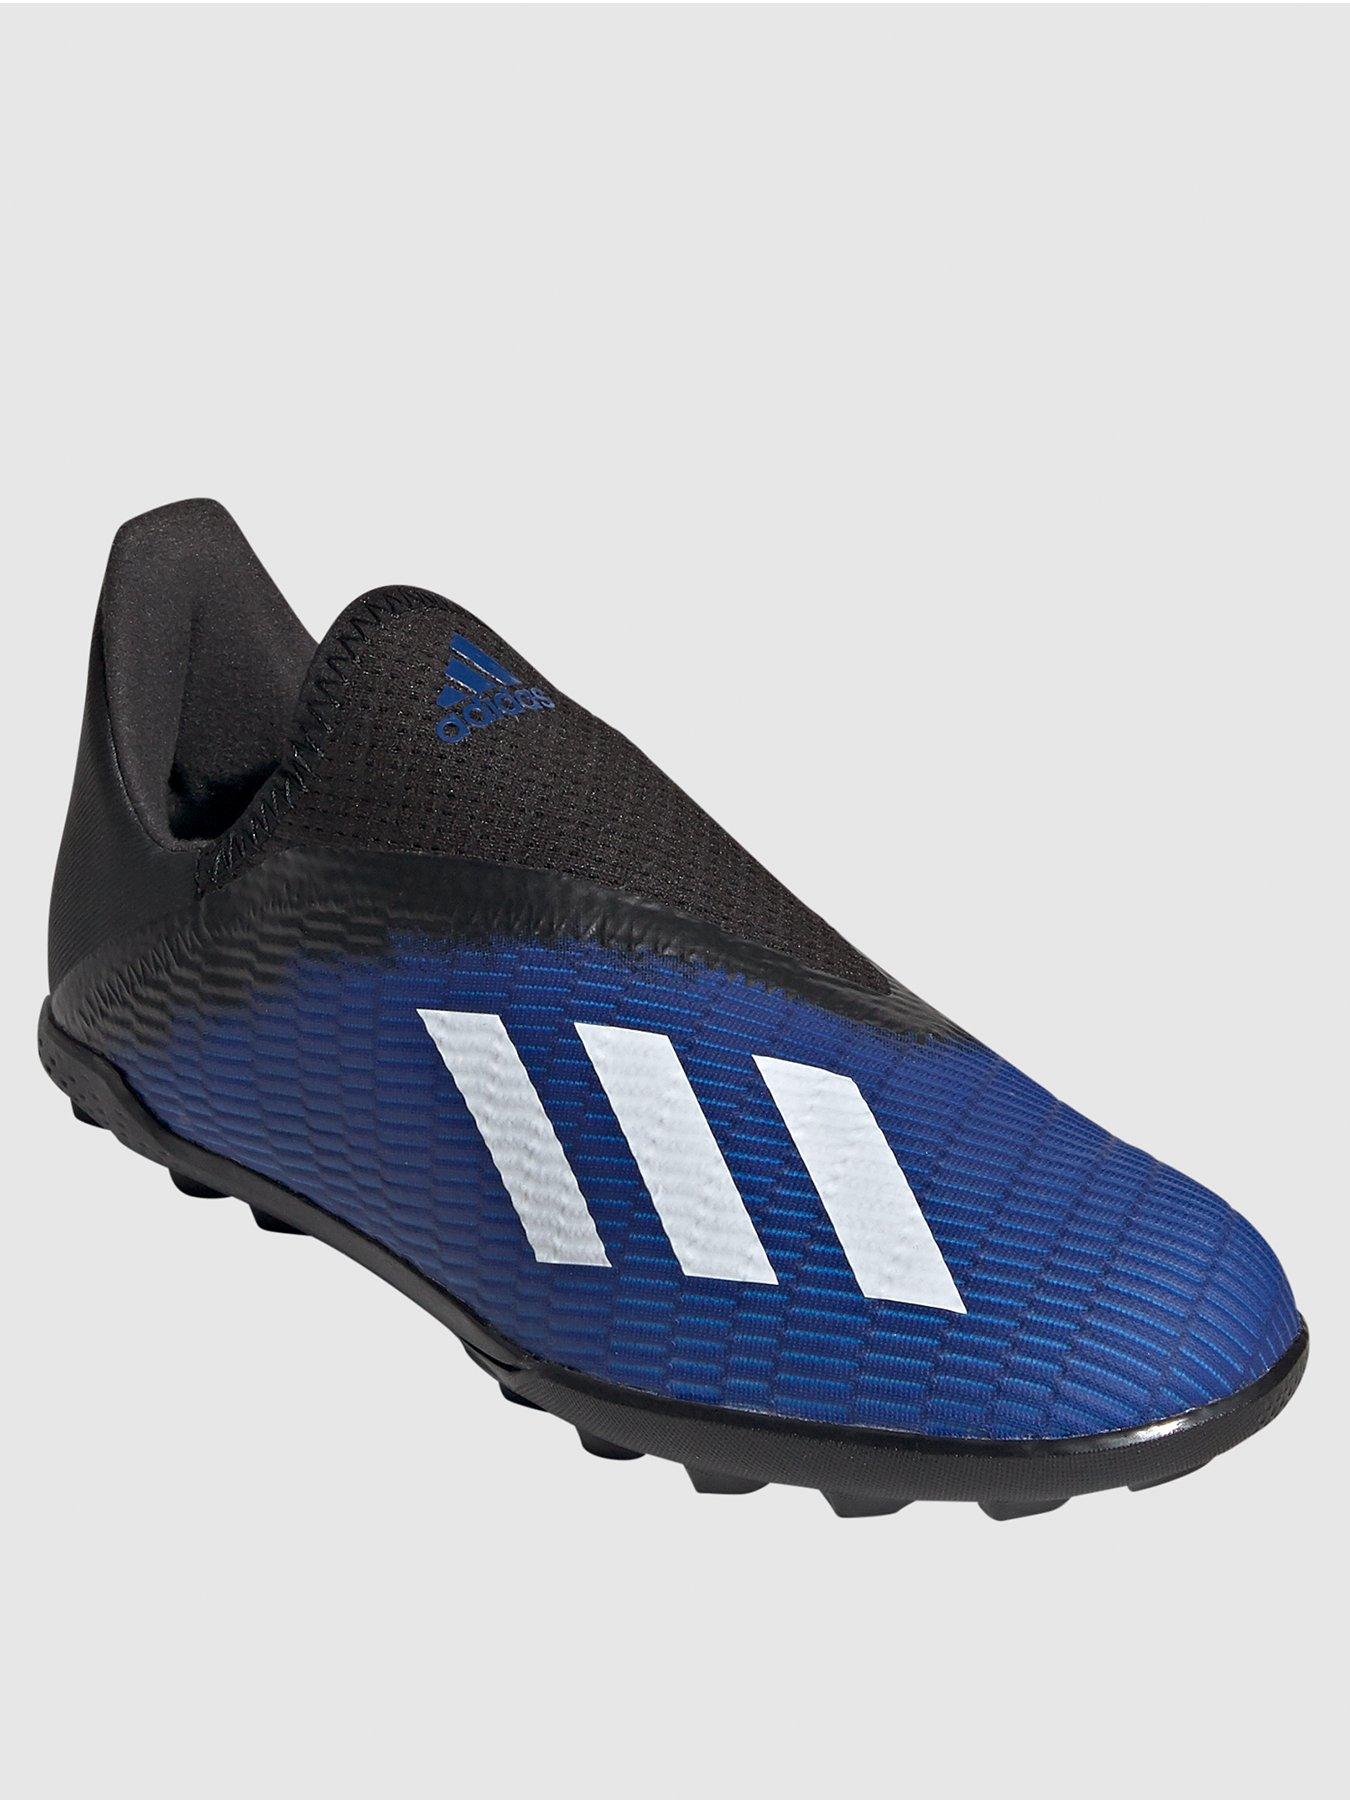 laceless astro turf boots